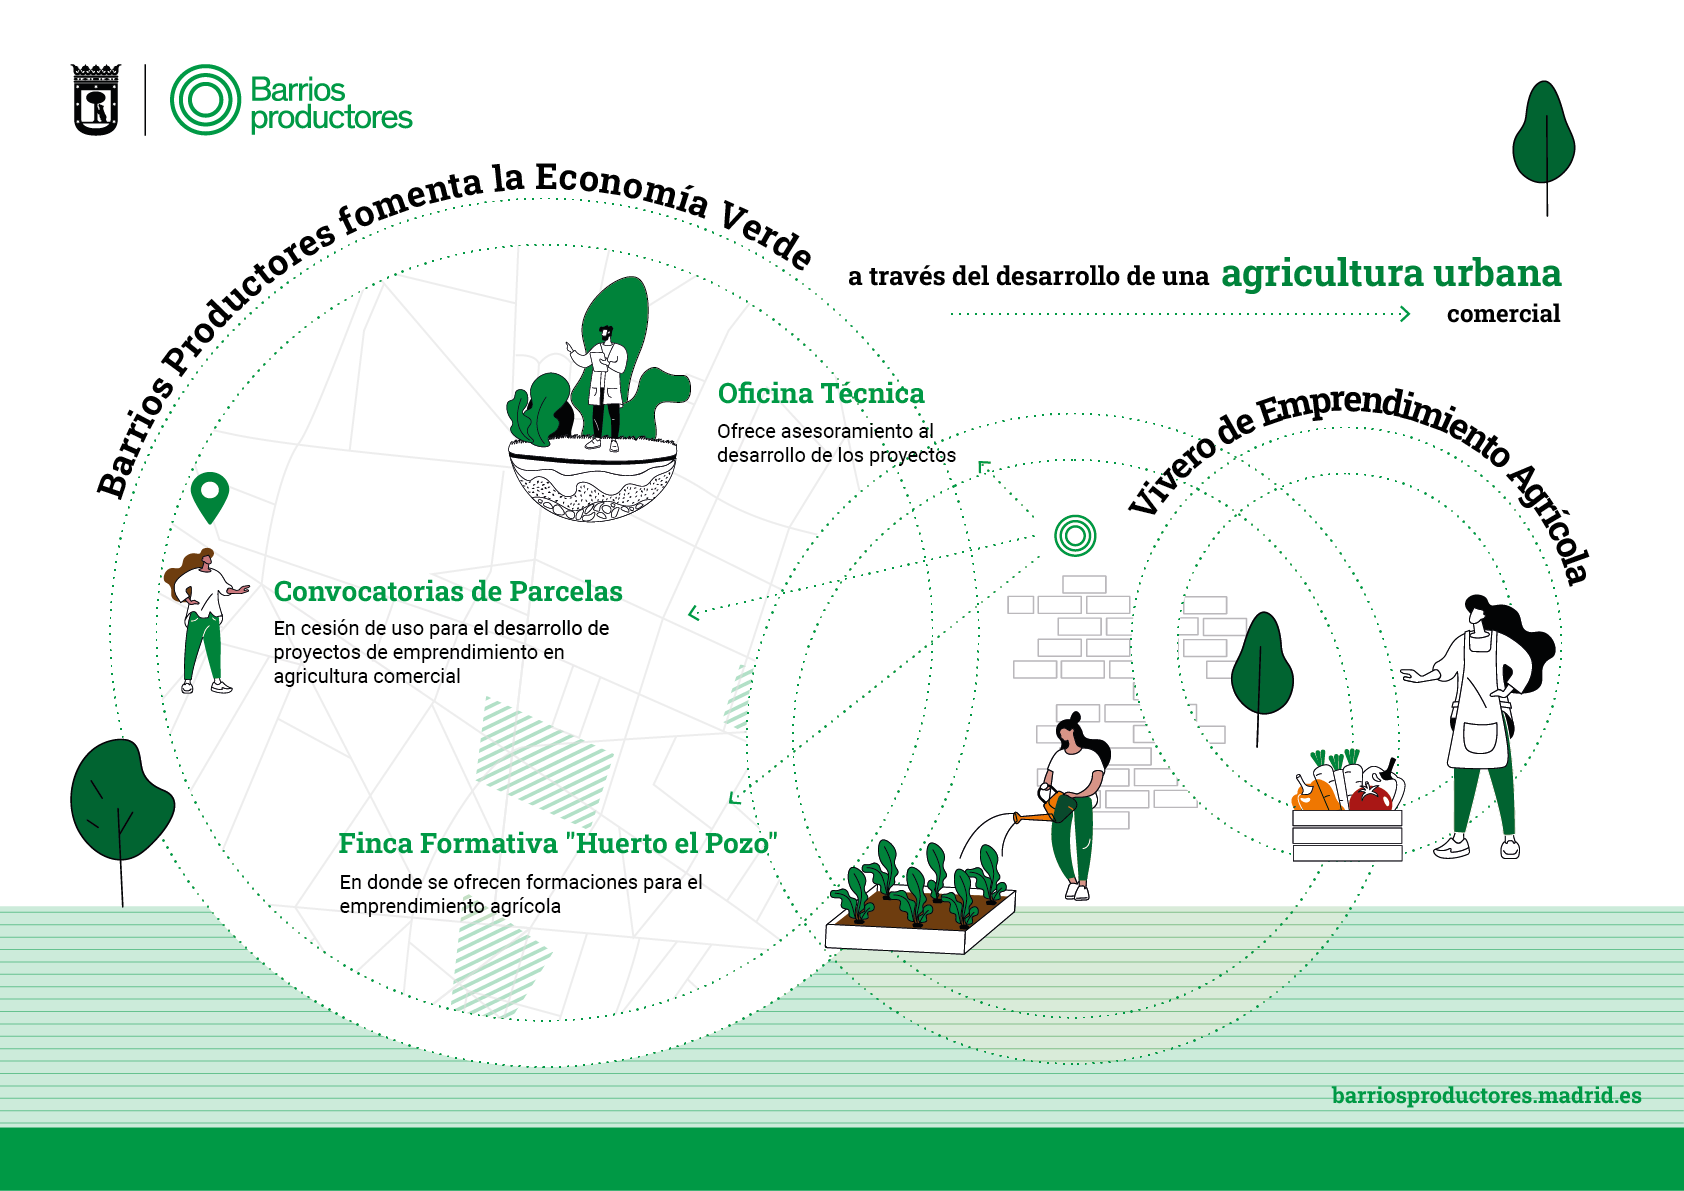 About Barrios Productores -